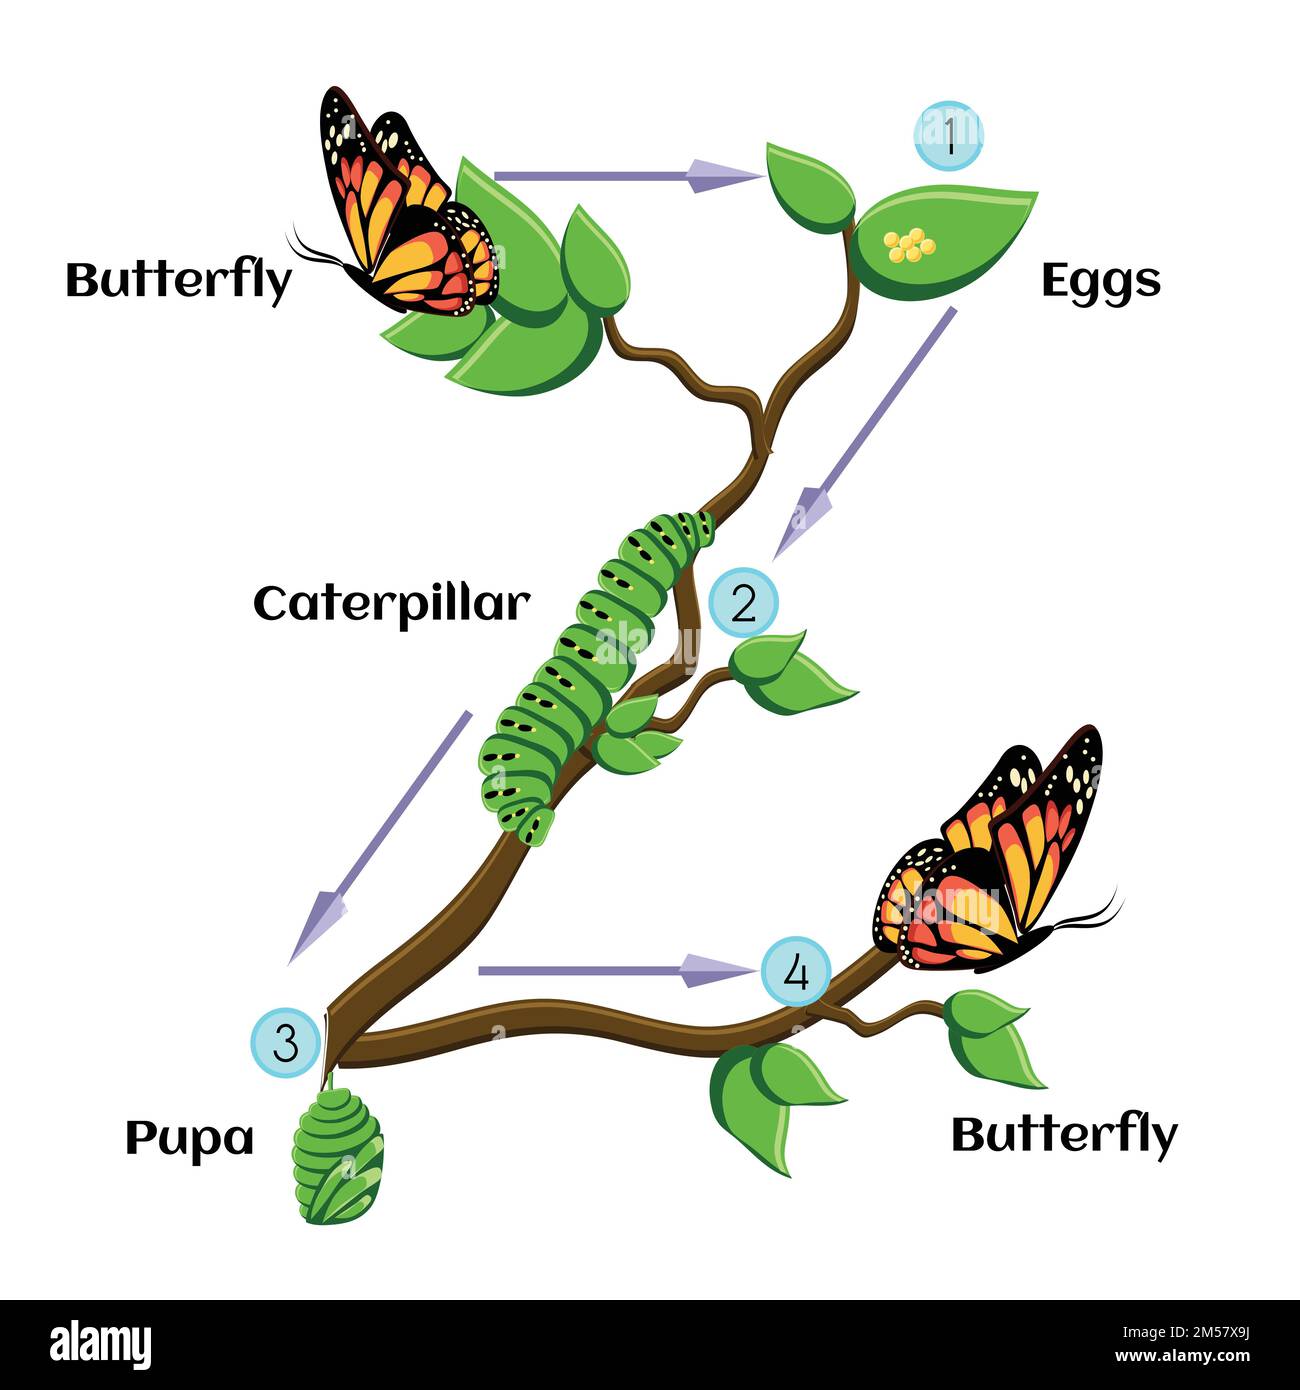 Life cycle of butterfl. Eggs, caterpillar, pupa, butterfly. Metamorphosis. Educational biology for kids. Cartoon vector illustration in flat style. Stock Vector